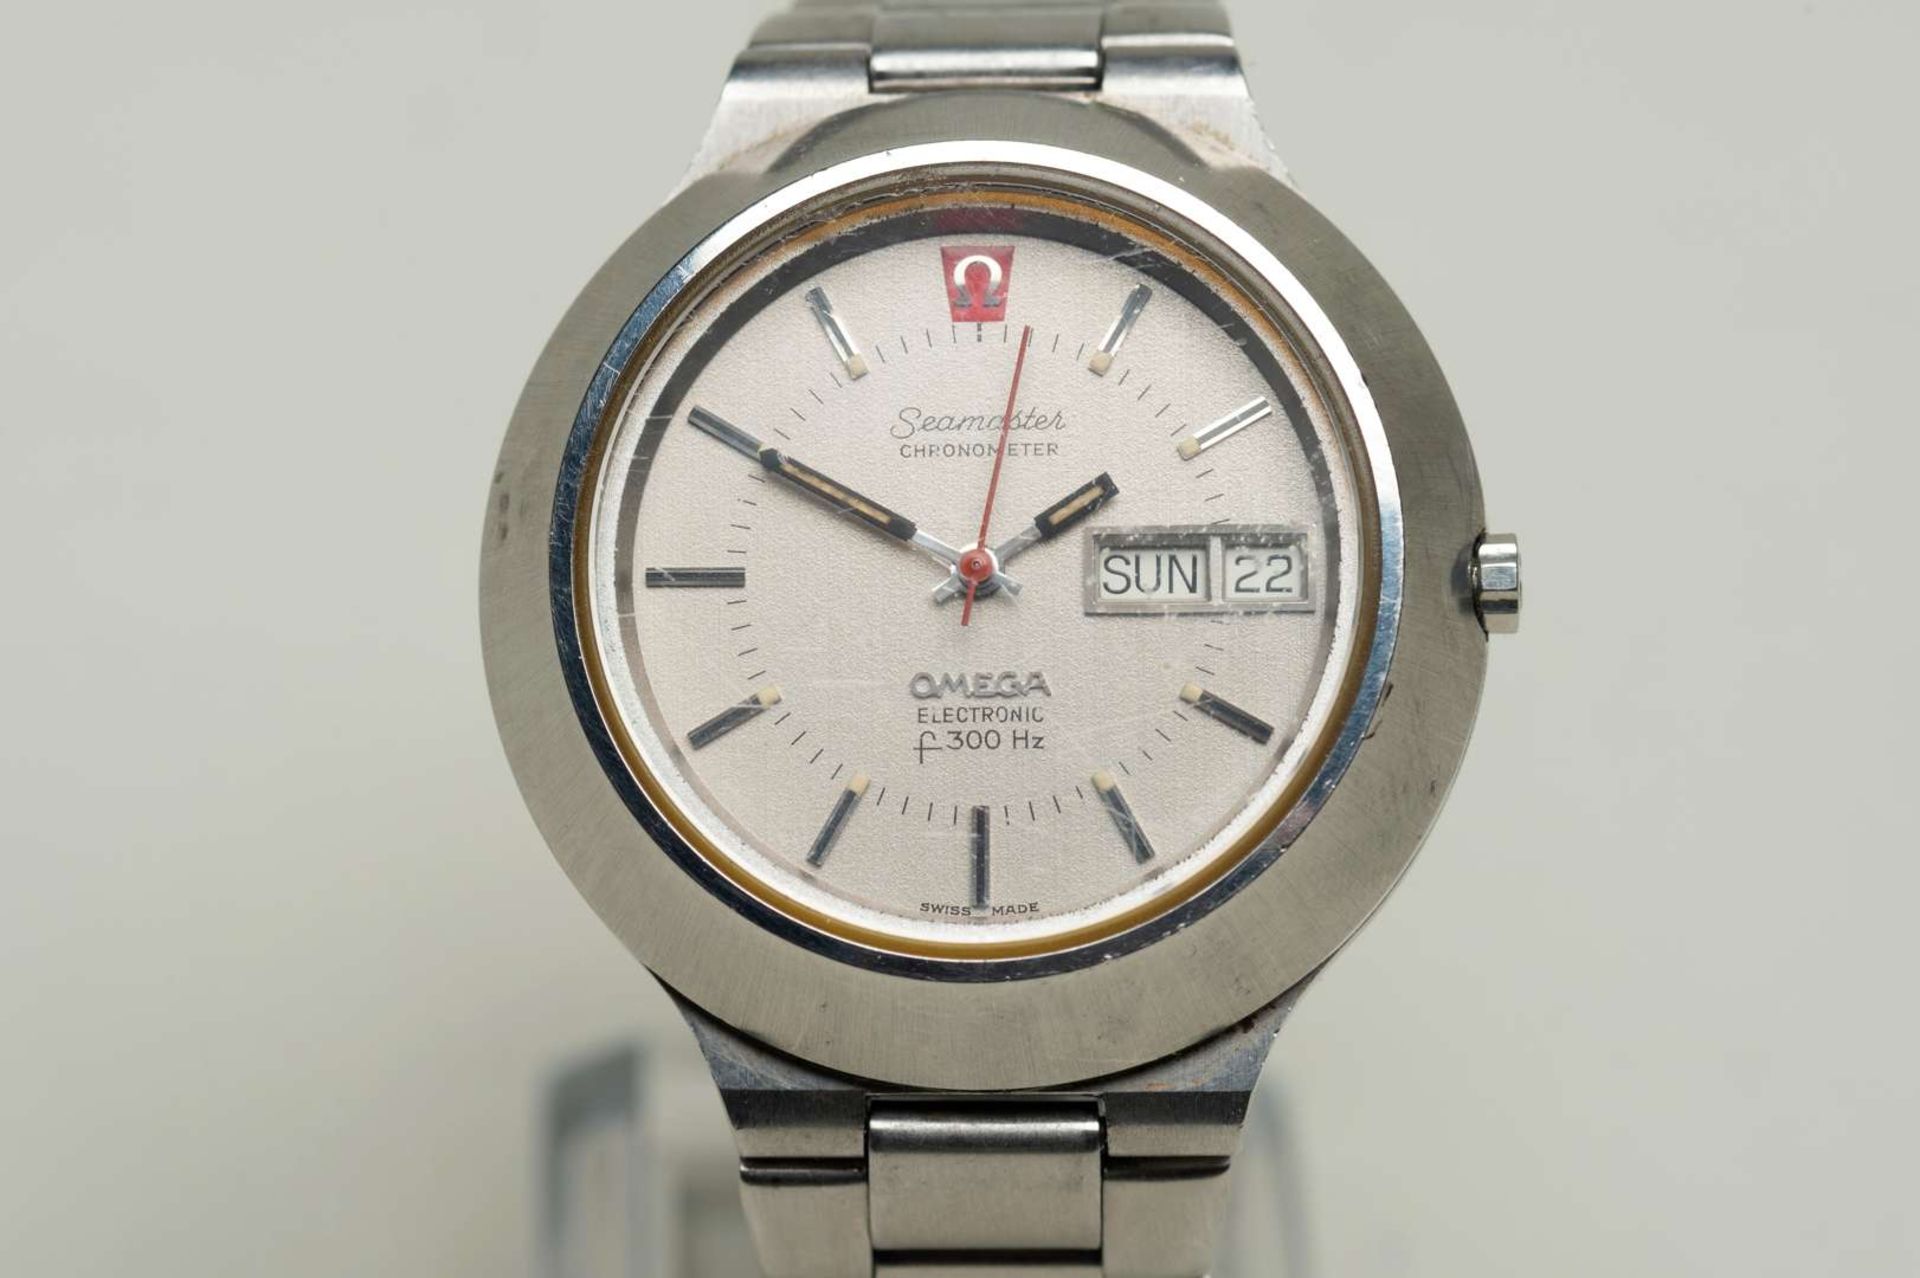 OMEGA, a 1970's Seamaster, Chronometer, Electronic f300 Hz, stainless steel day/date wristwatch.